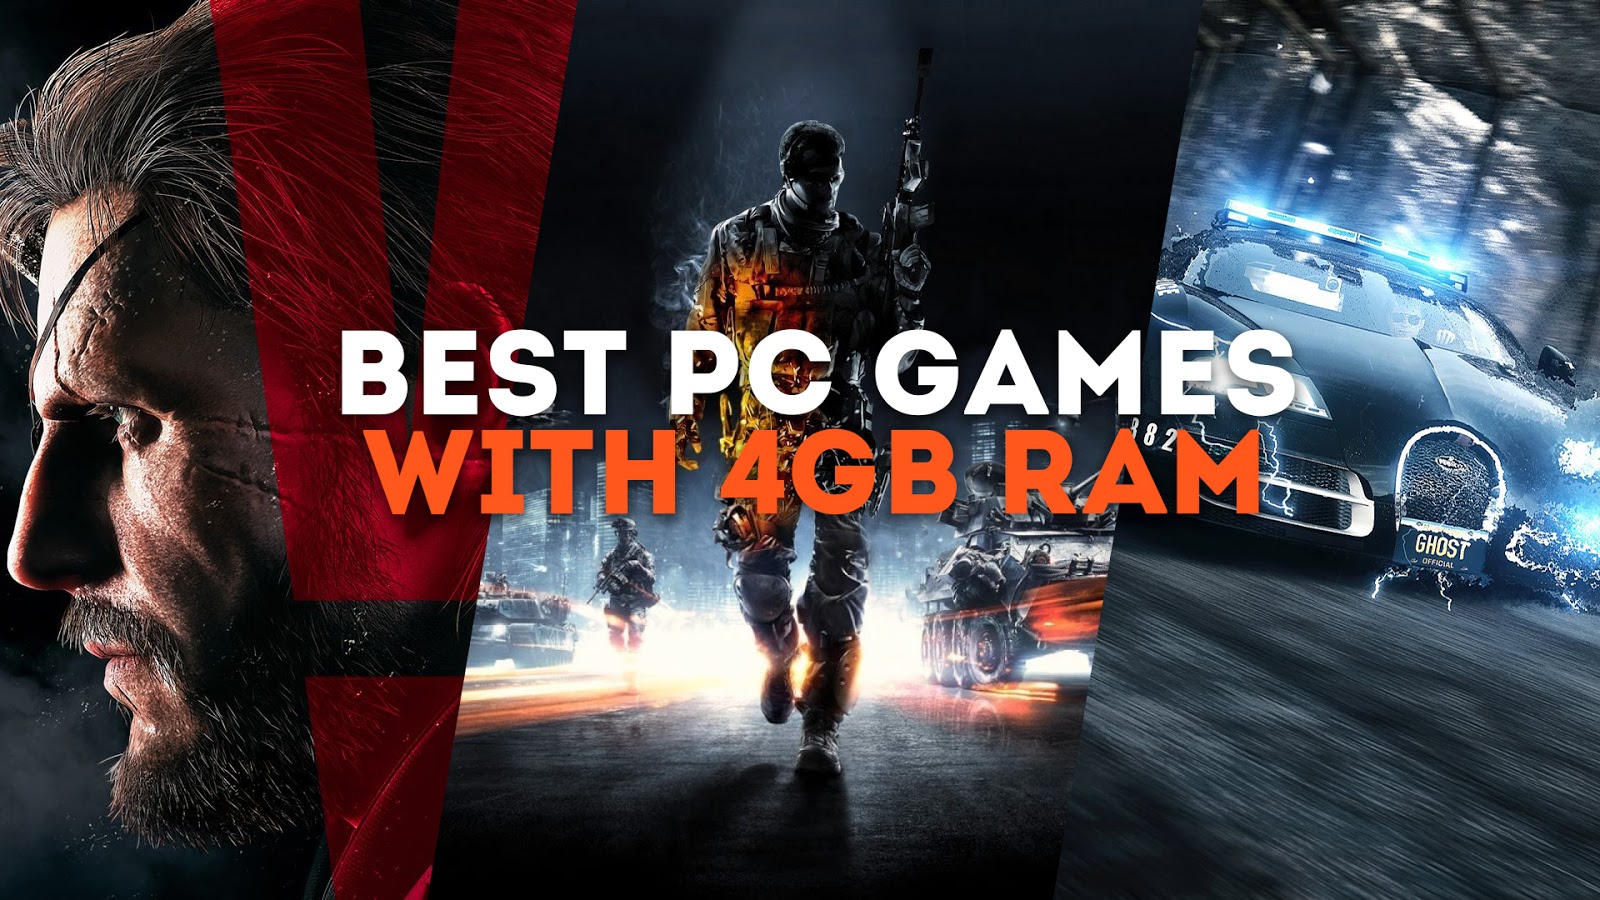 4gb Ram Games For Pc